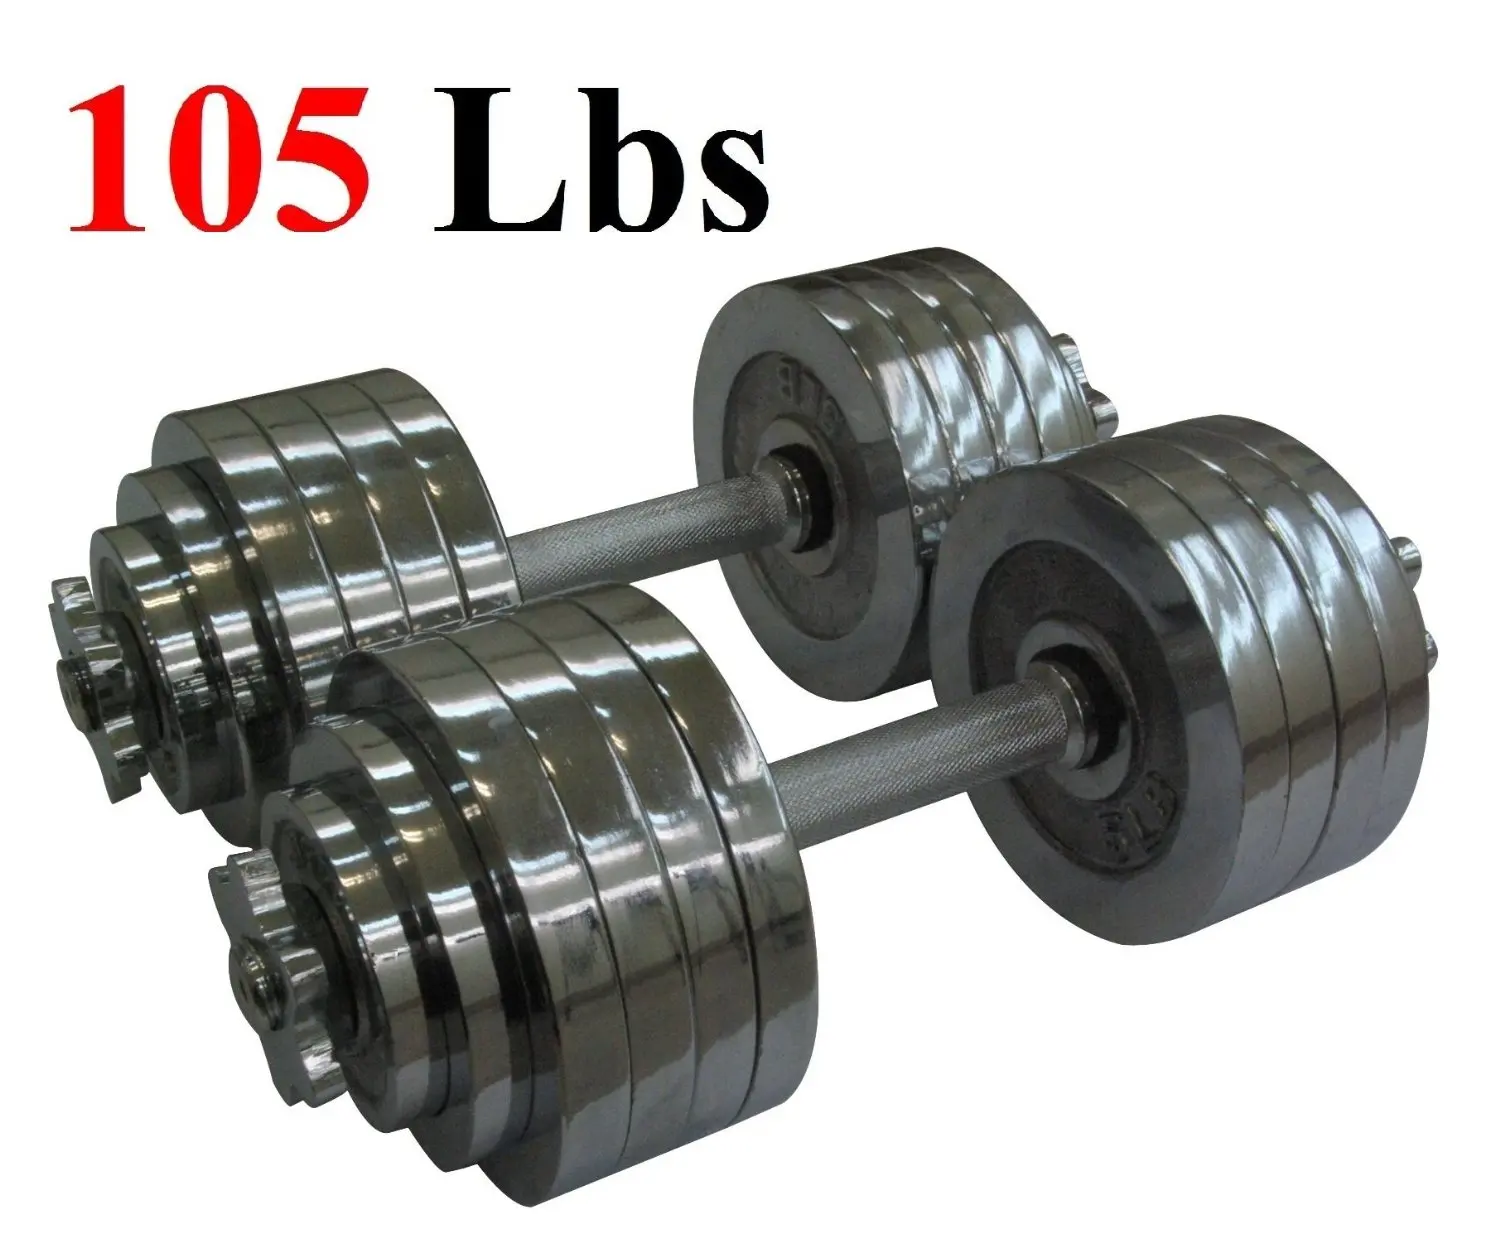 105.67. One Pair of Adjustable Dumbbells Chrome Plated Metal Total 105 Lbs ...